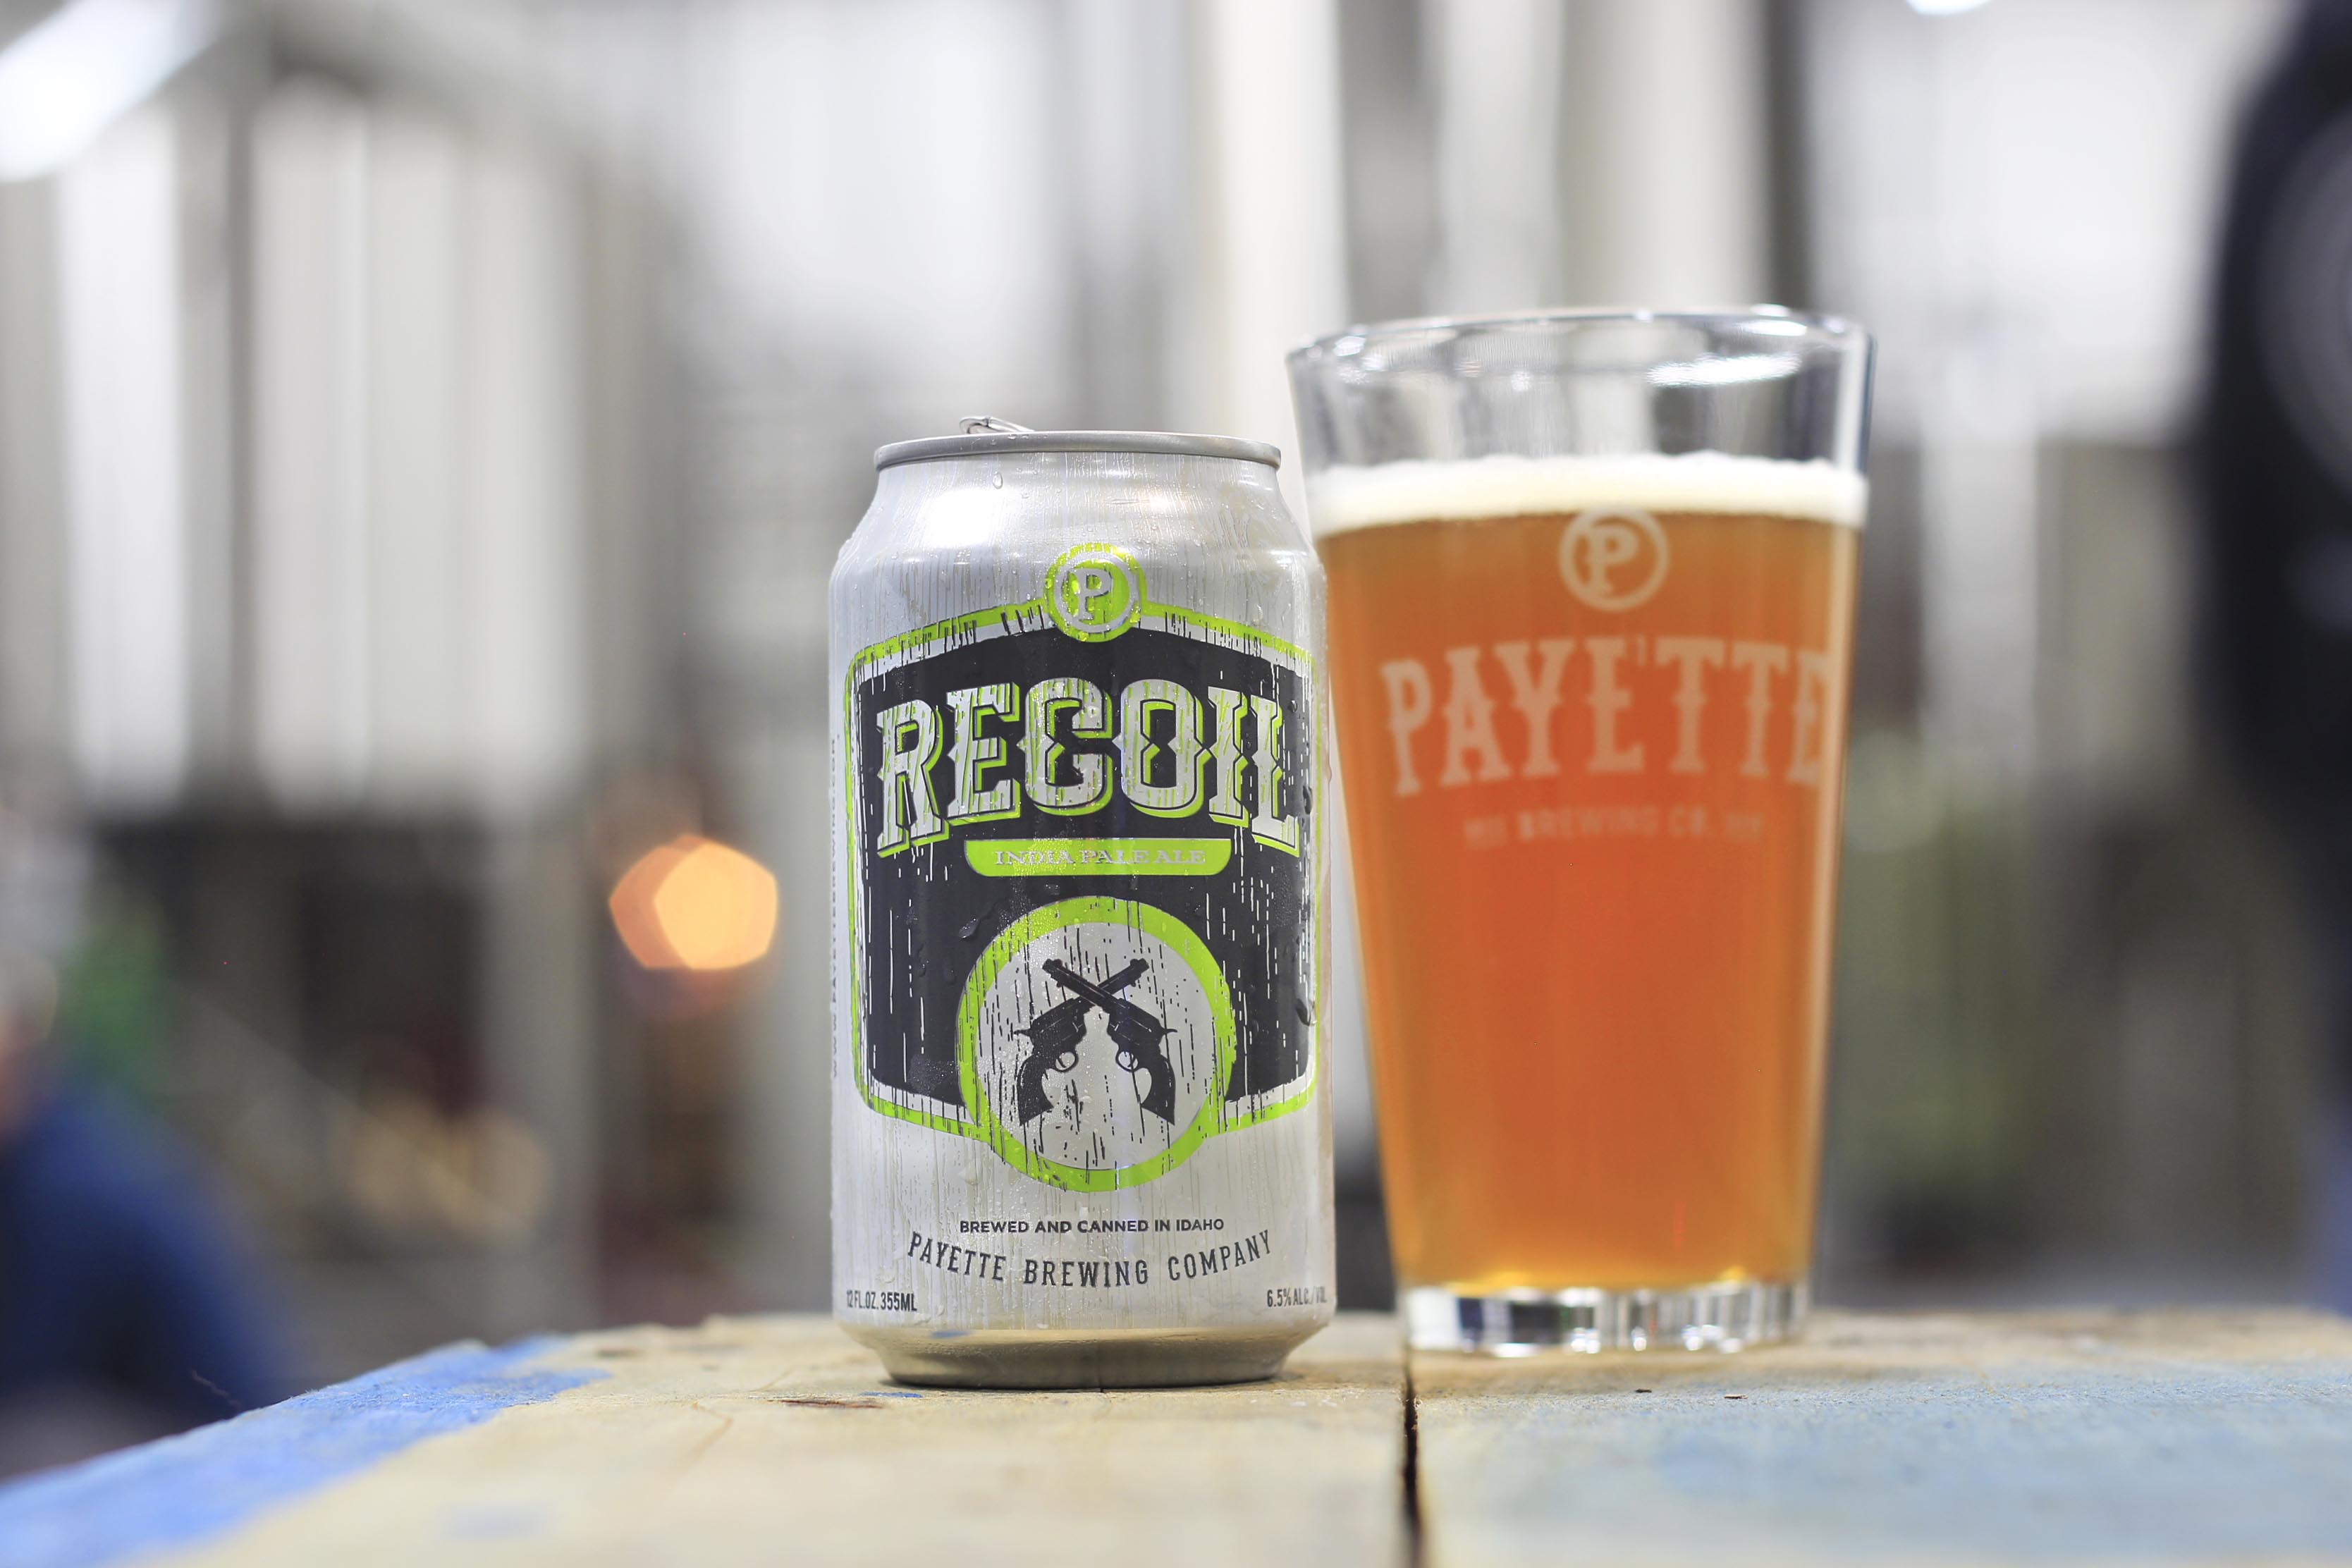 Payette_Recoil_IPA